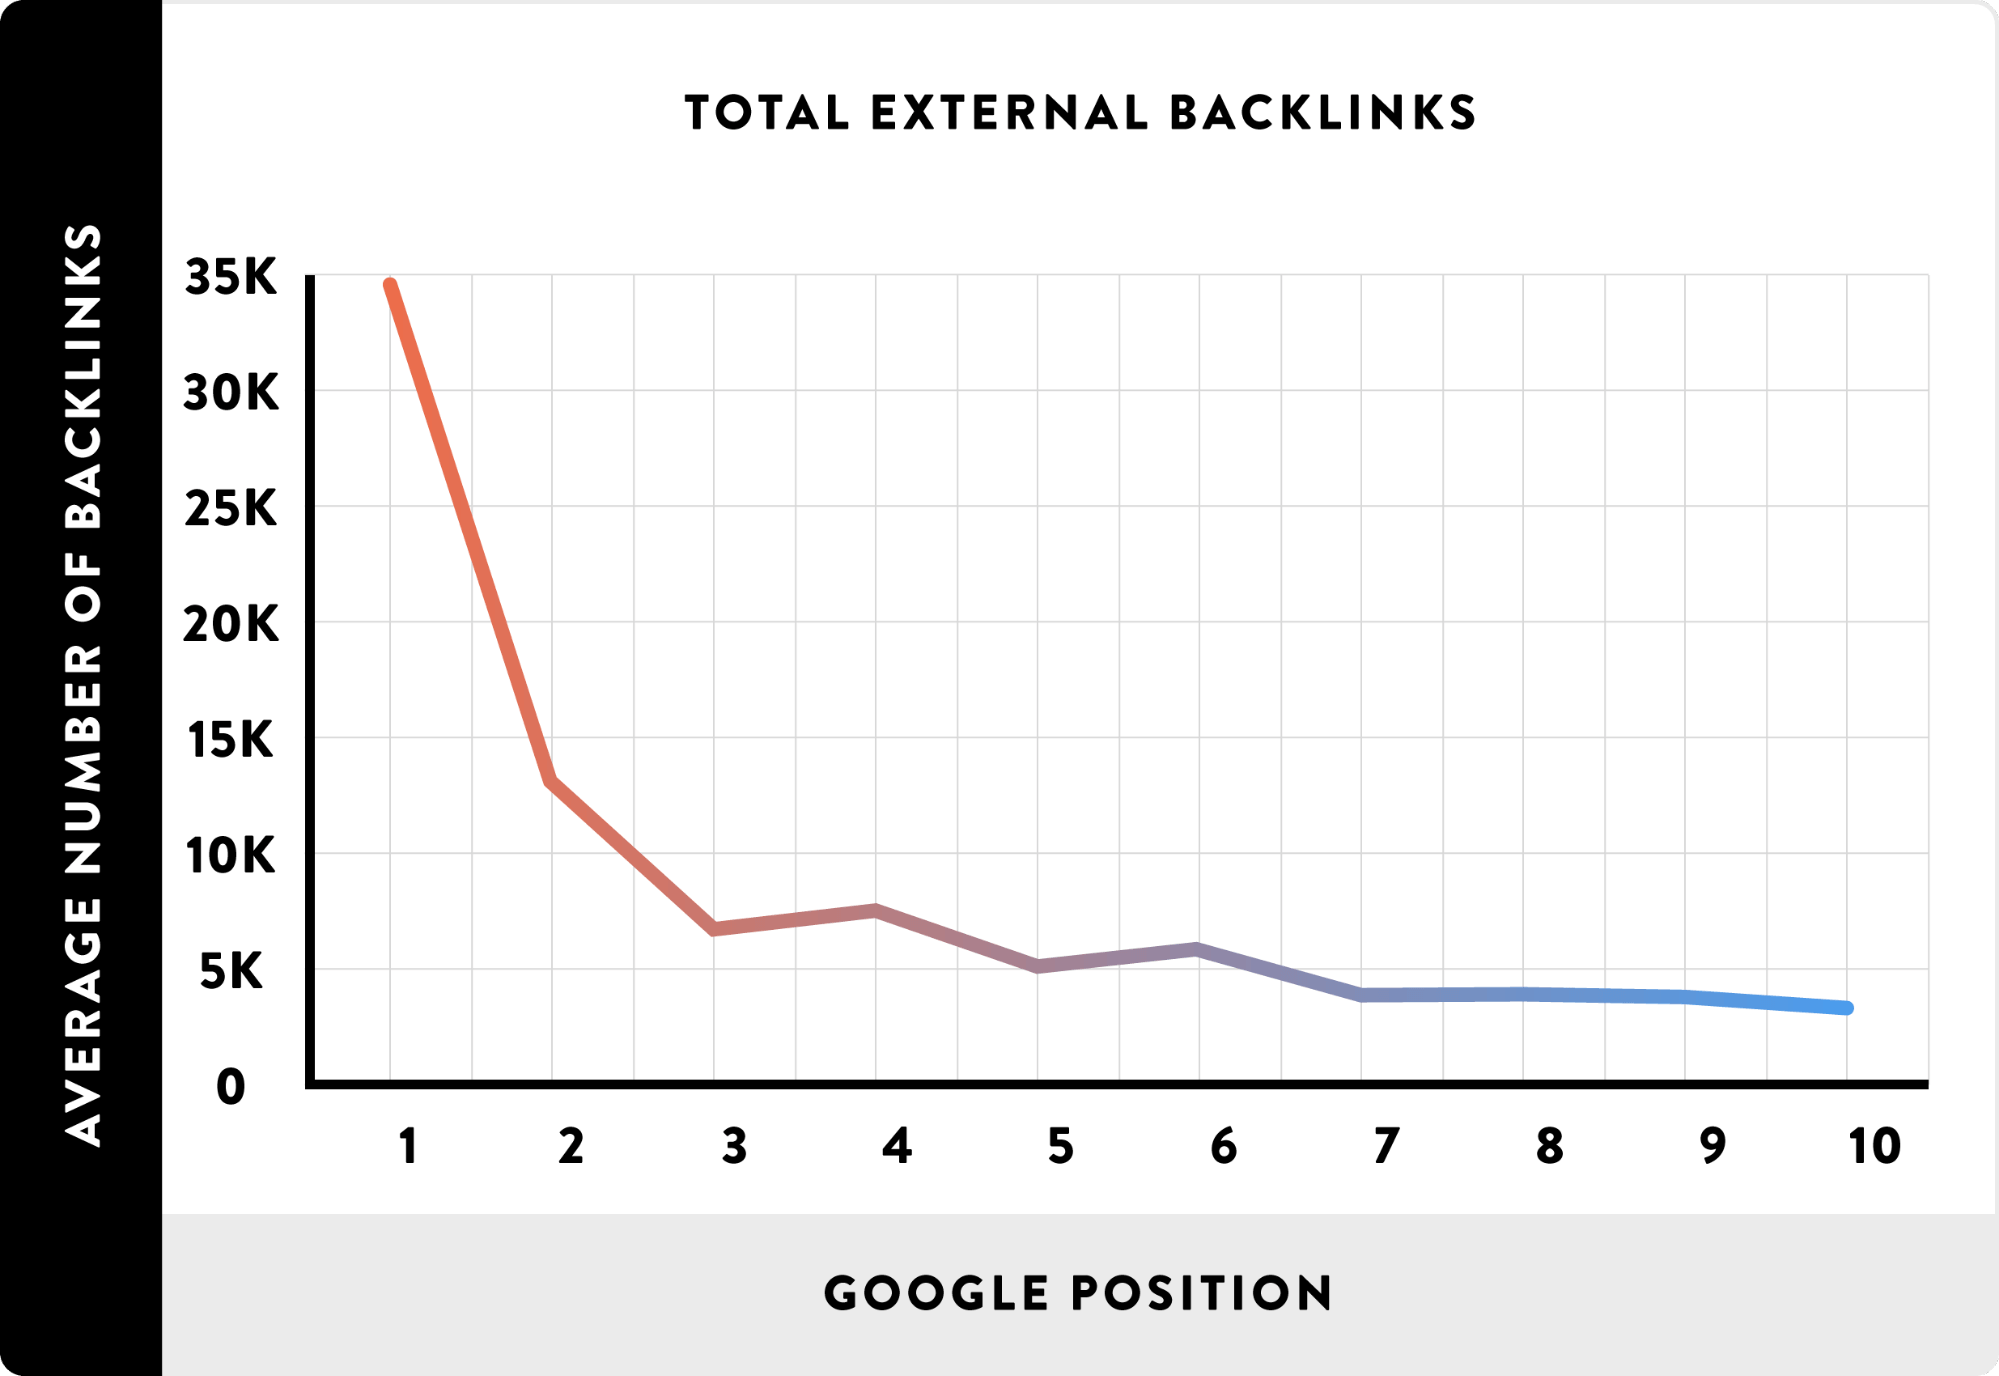 Total-External-Backlinks-and-Google-Position-graph